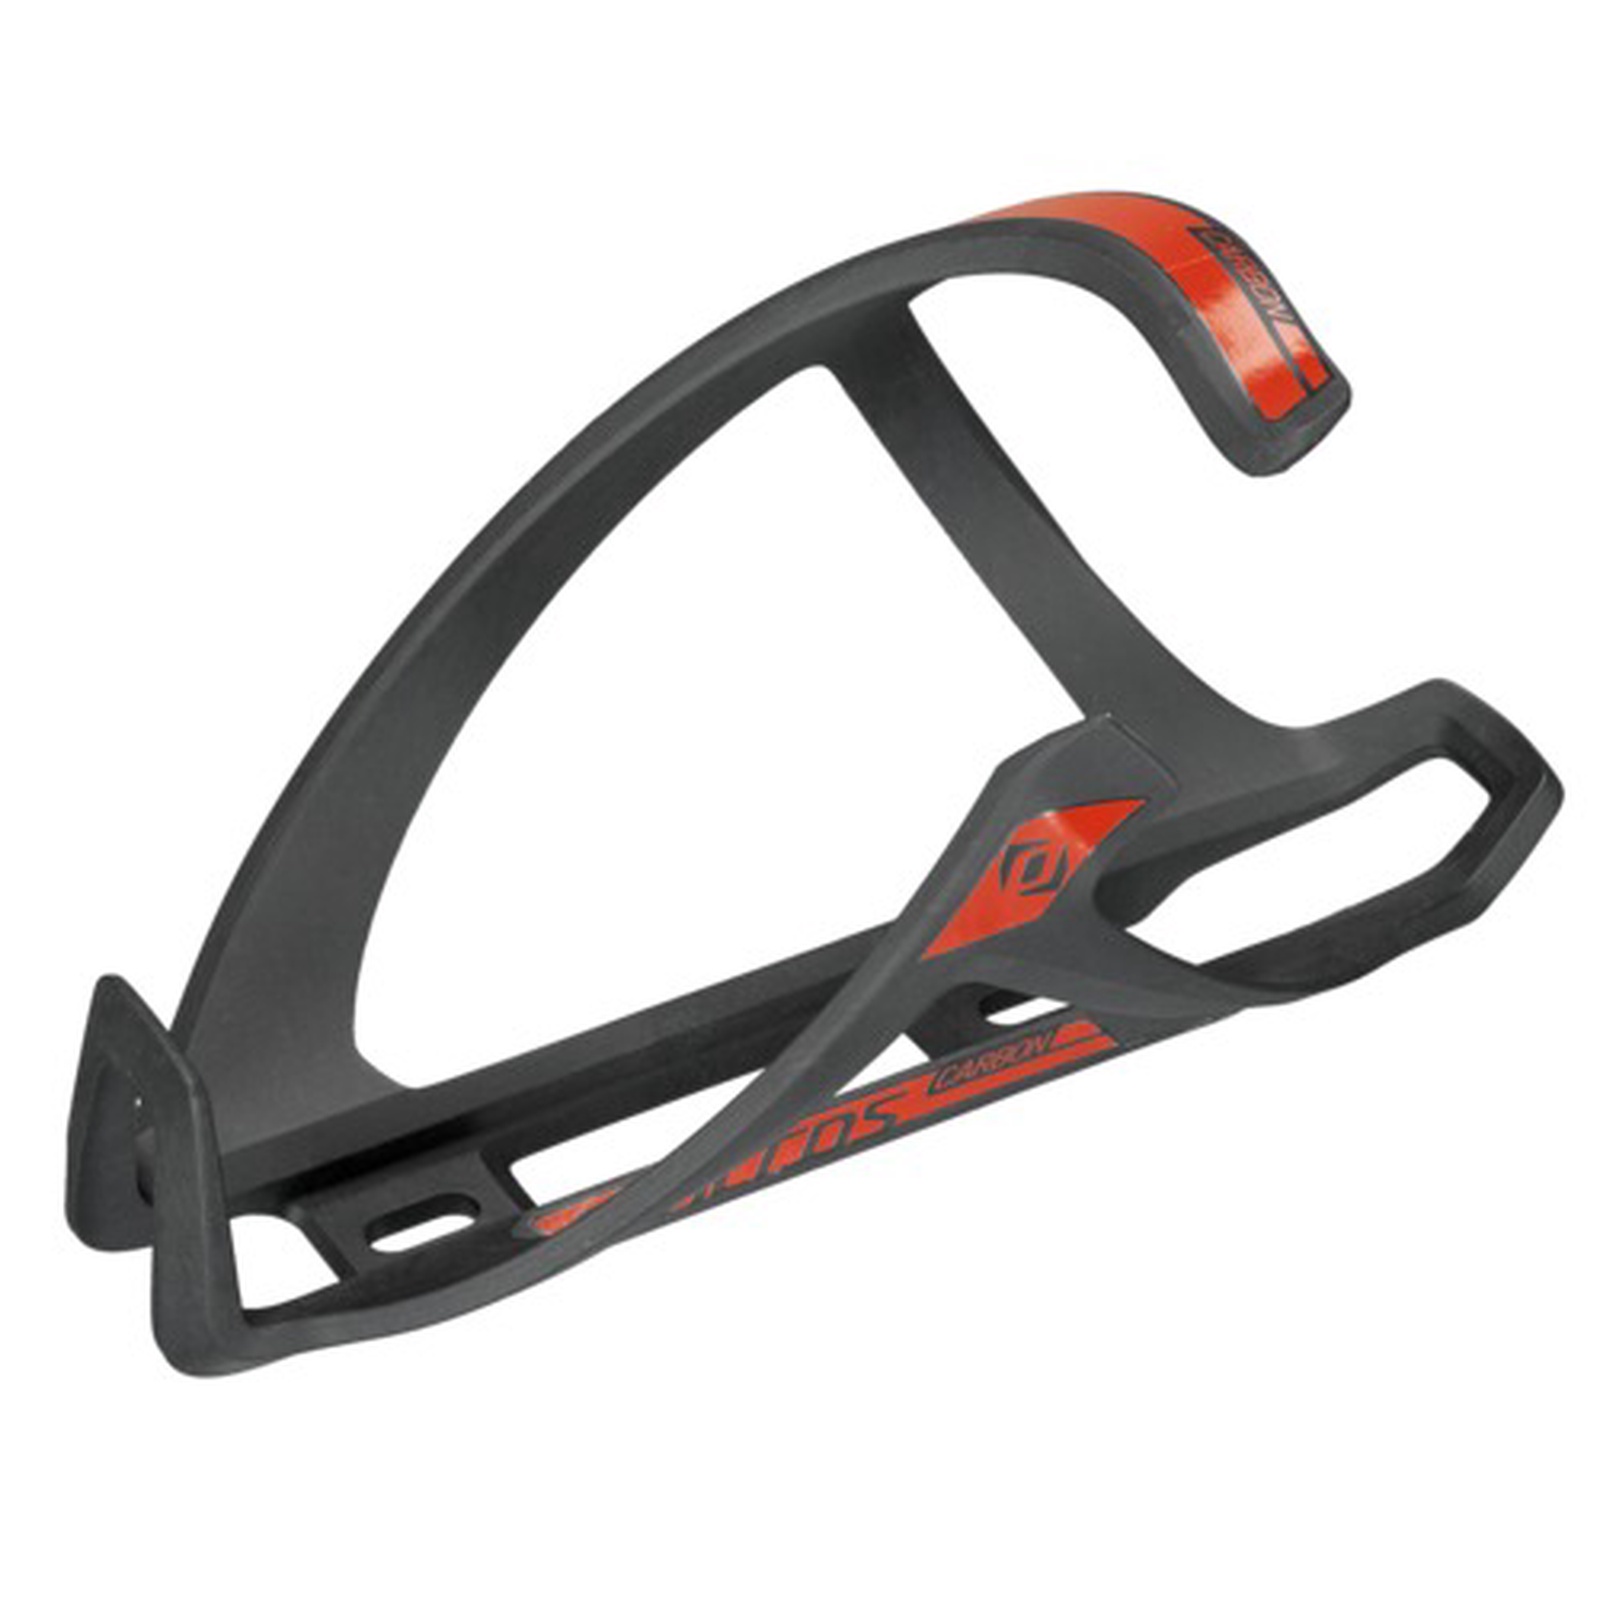 SYN Bottle Cage Tailor cage 1.0 Right